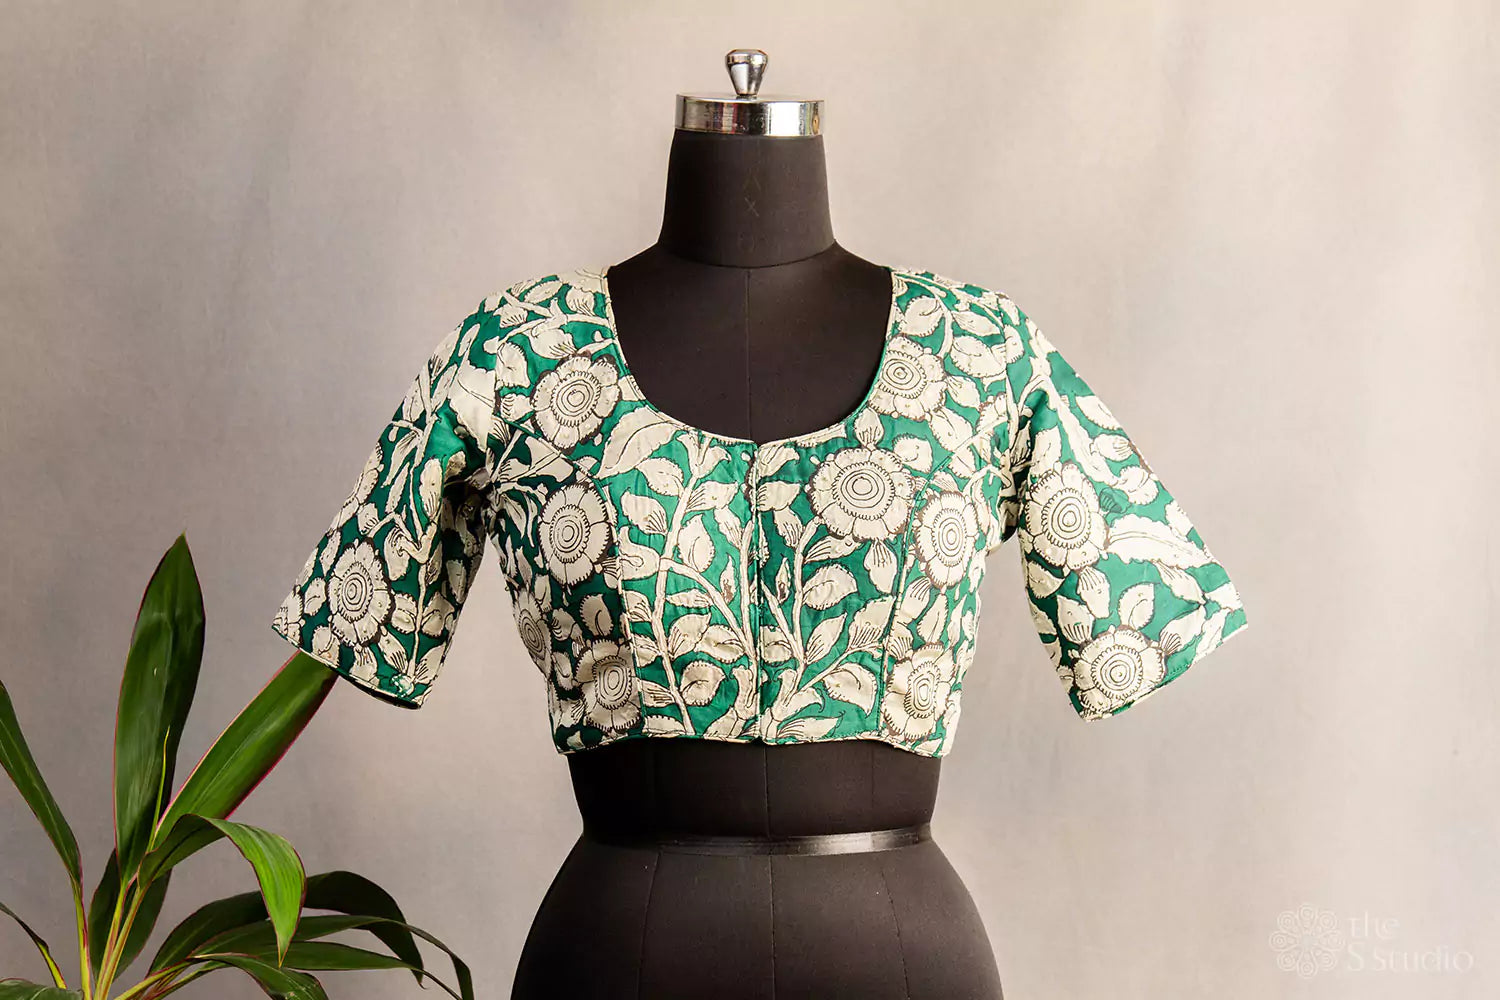 Green and white pen kalamkari hand painted silk blouse with kantha embroidery